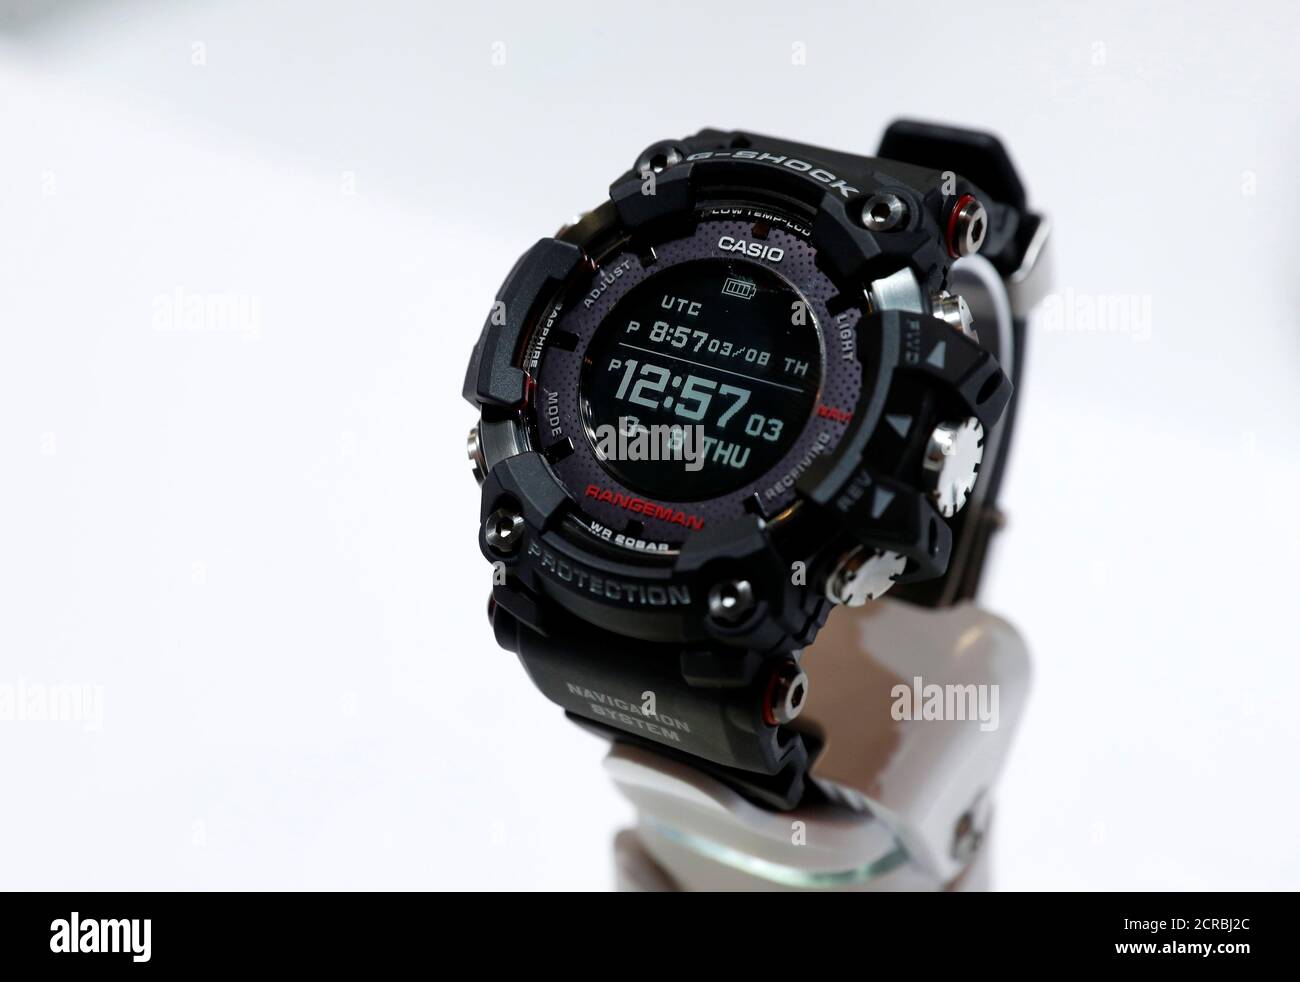 The Casio G-Shock Rangeman, a solar-powered watch with GPS navigation,  during the 2018 CES in Las Vegas, Nevada, U.S. January 10, 2018.  REUTERS/Steve Marcus Stock Photo - Alamy